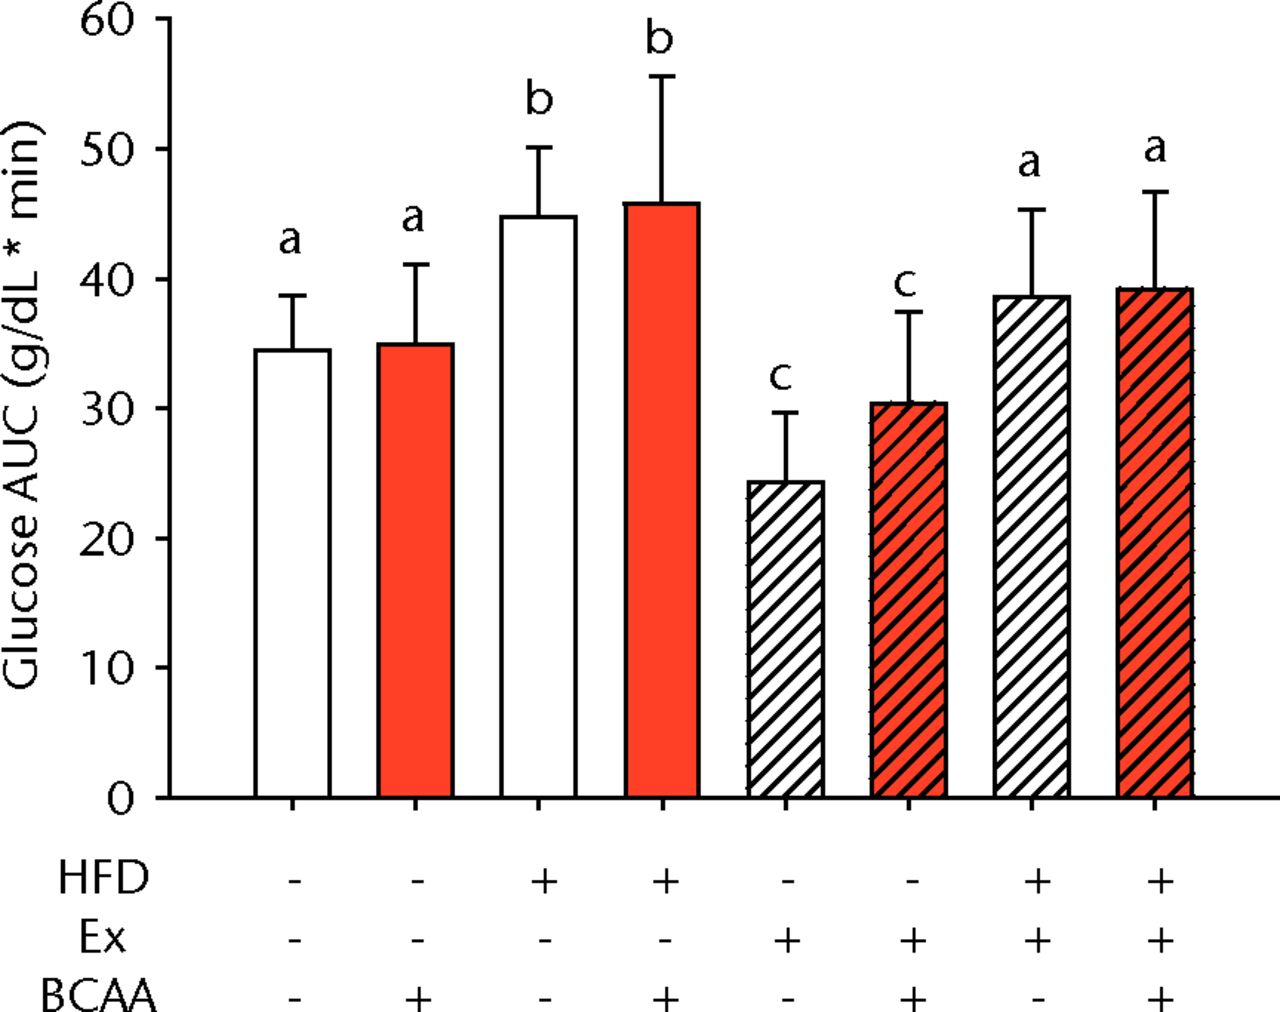 Figs. 1a - 1b 
            Bar charts showing a) the
mean body weight (measured after 16 weeks of intervention, immediately
after death) and b) the mean glucose tolerance for each group. During
the tenth week of treatment, animals were fasted for three hours
before recording fasting blood glucose. Blood glucose reading was
repeated 15, 30, 60, and 120 minutes after glucose injection, and
the area under the curve (AUC) for glucose disposal summarises the
time course. In each chart, groups not sharing a letter (‘a’, ‘b’,
or ‘c’) are significantly different, based on post-hoc comparisons
following a significant two-way interaction between high-fat diet (HFD)
and exercise (Ex) (p <
 0.05). Error bars indicate standard deviation
(BCAA, branched-chain amino acid).
          